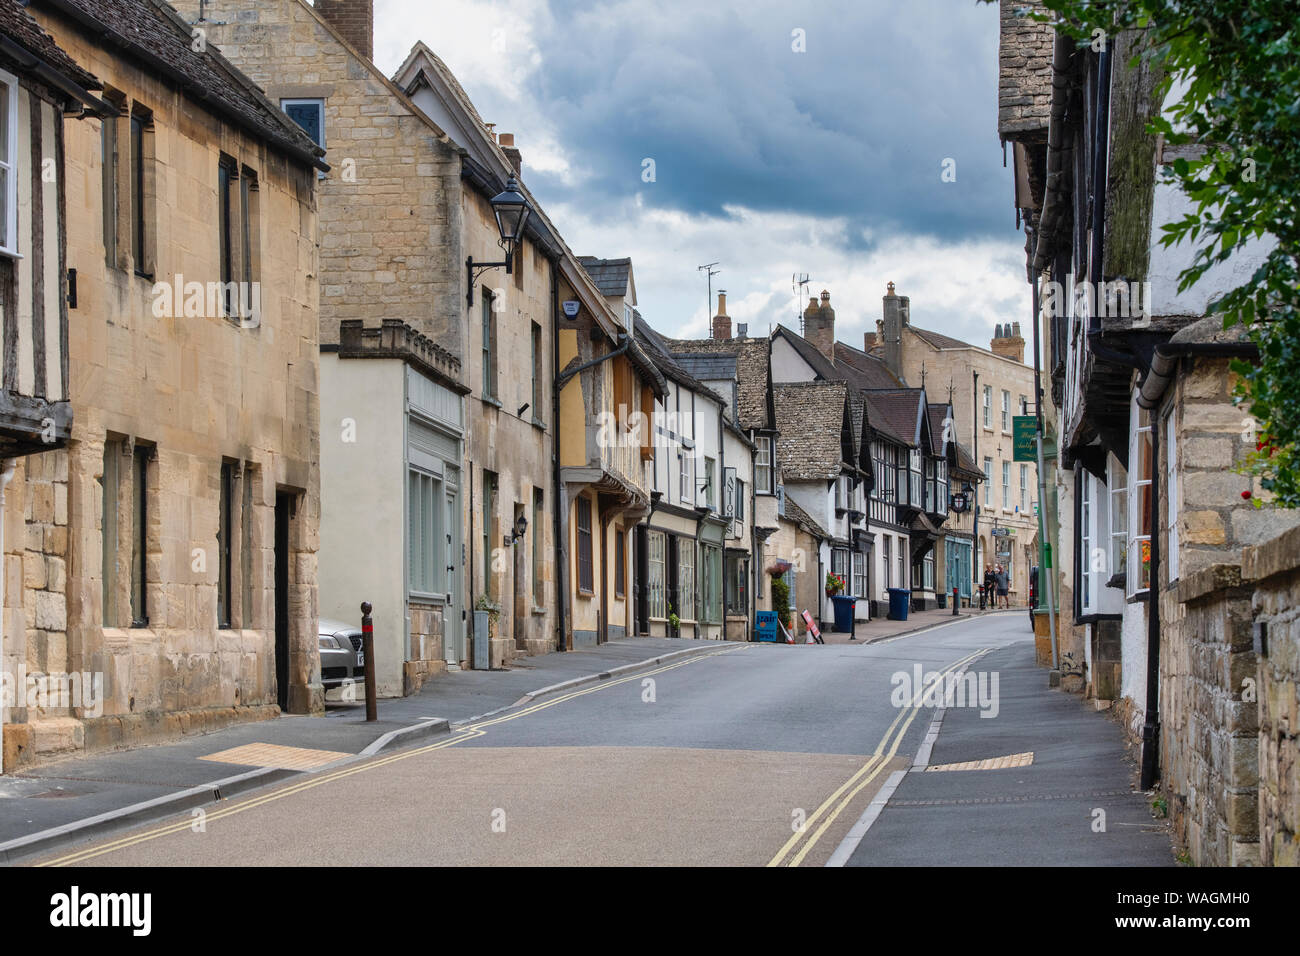 Cotswold stone buildings along Hailes Street, Winchcombe, Gloucestershire, England Stock Photo